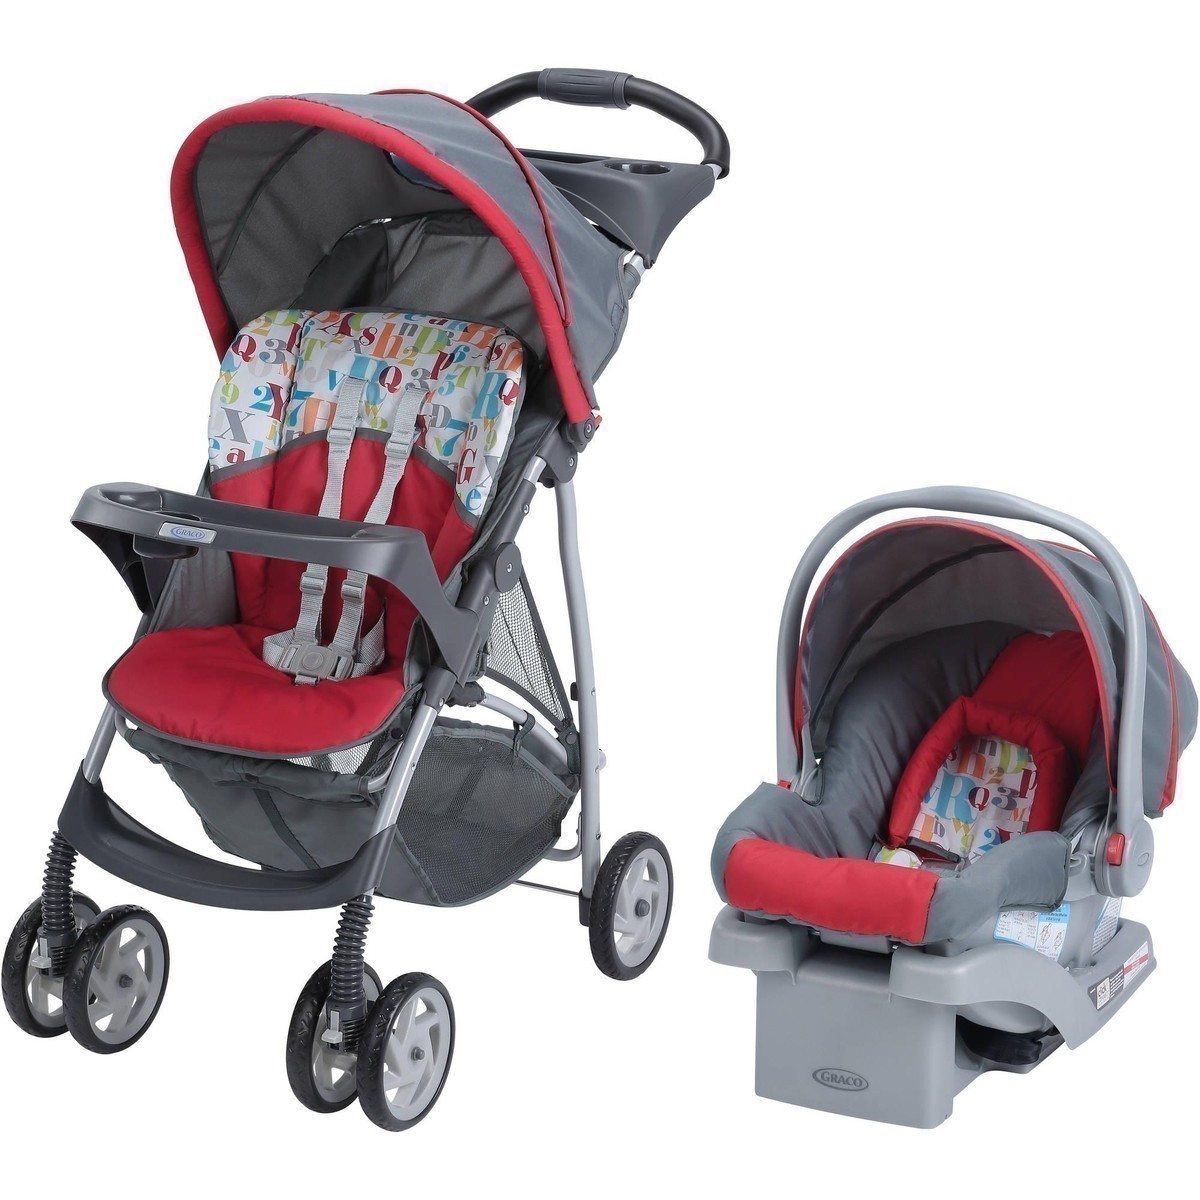 Walmart: Graco LiteRider Click Connect Travel System with Car Seat $114